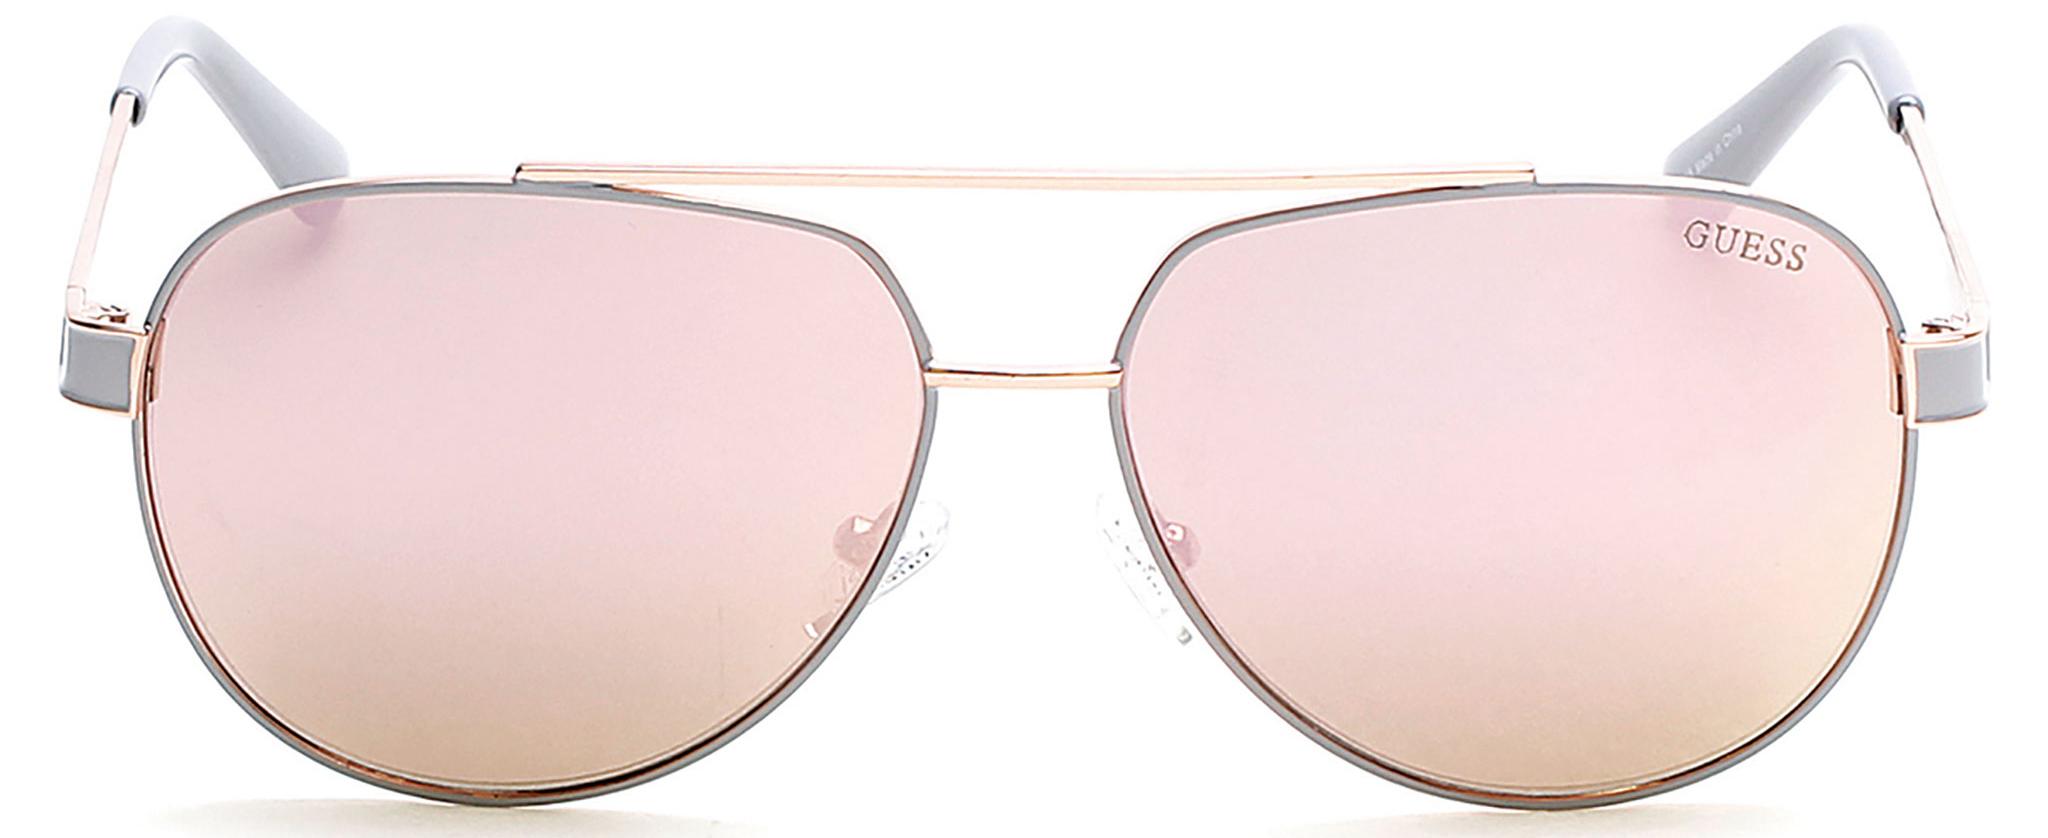 Guess 7460 Aviator Sunglasses in Pink - Lyst